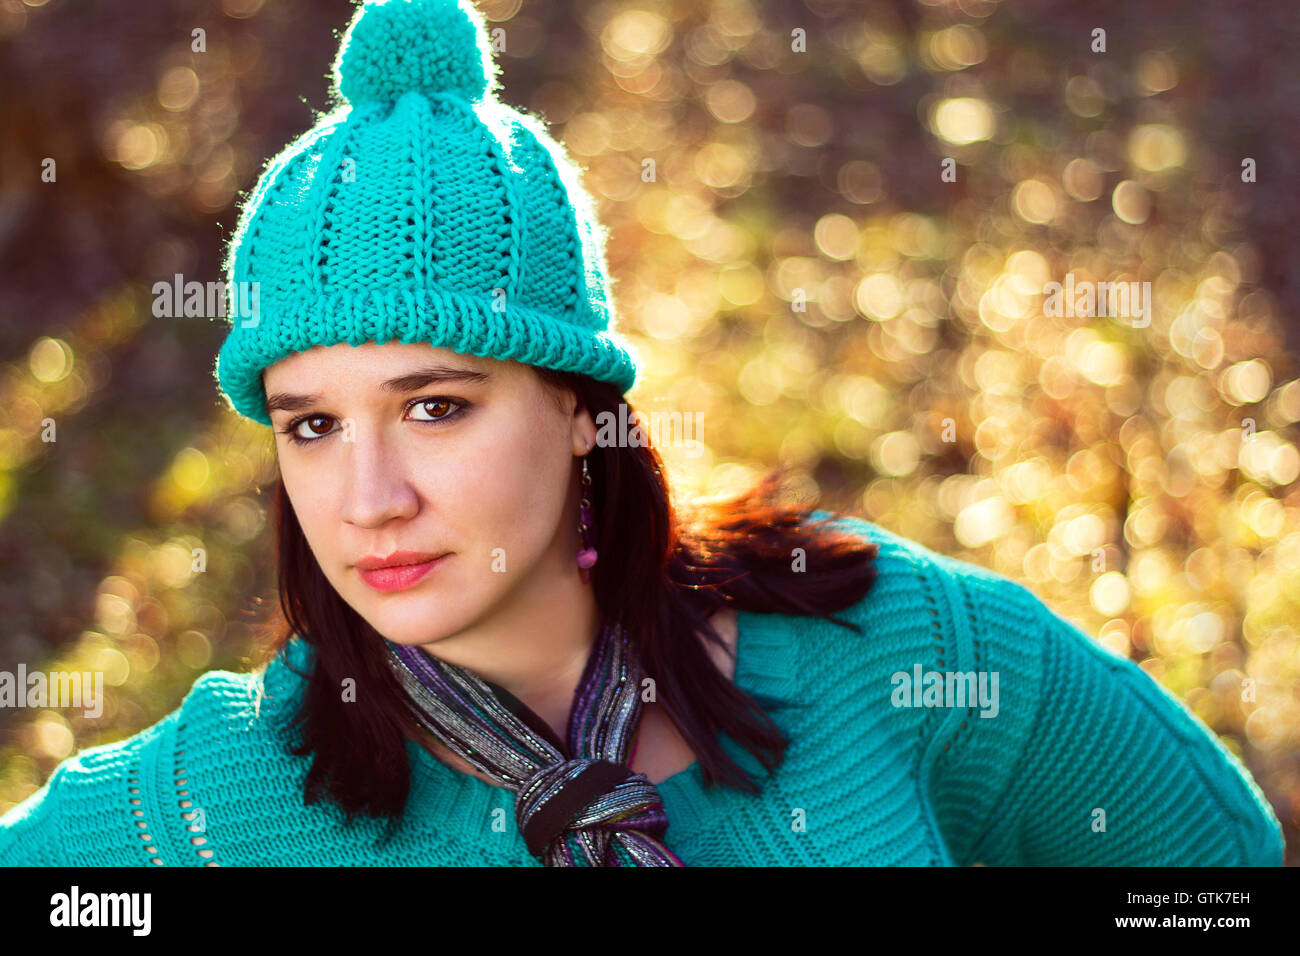 A Portrait Of A Stylish And Beautiful Woman In Matching Hat And Sweater